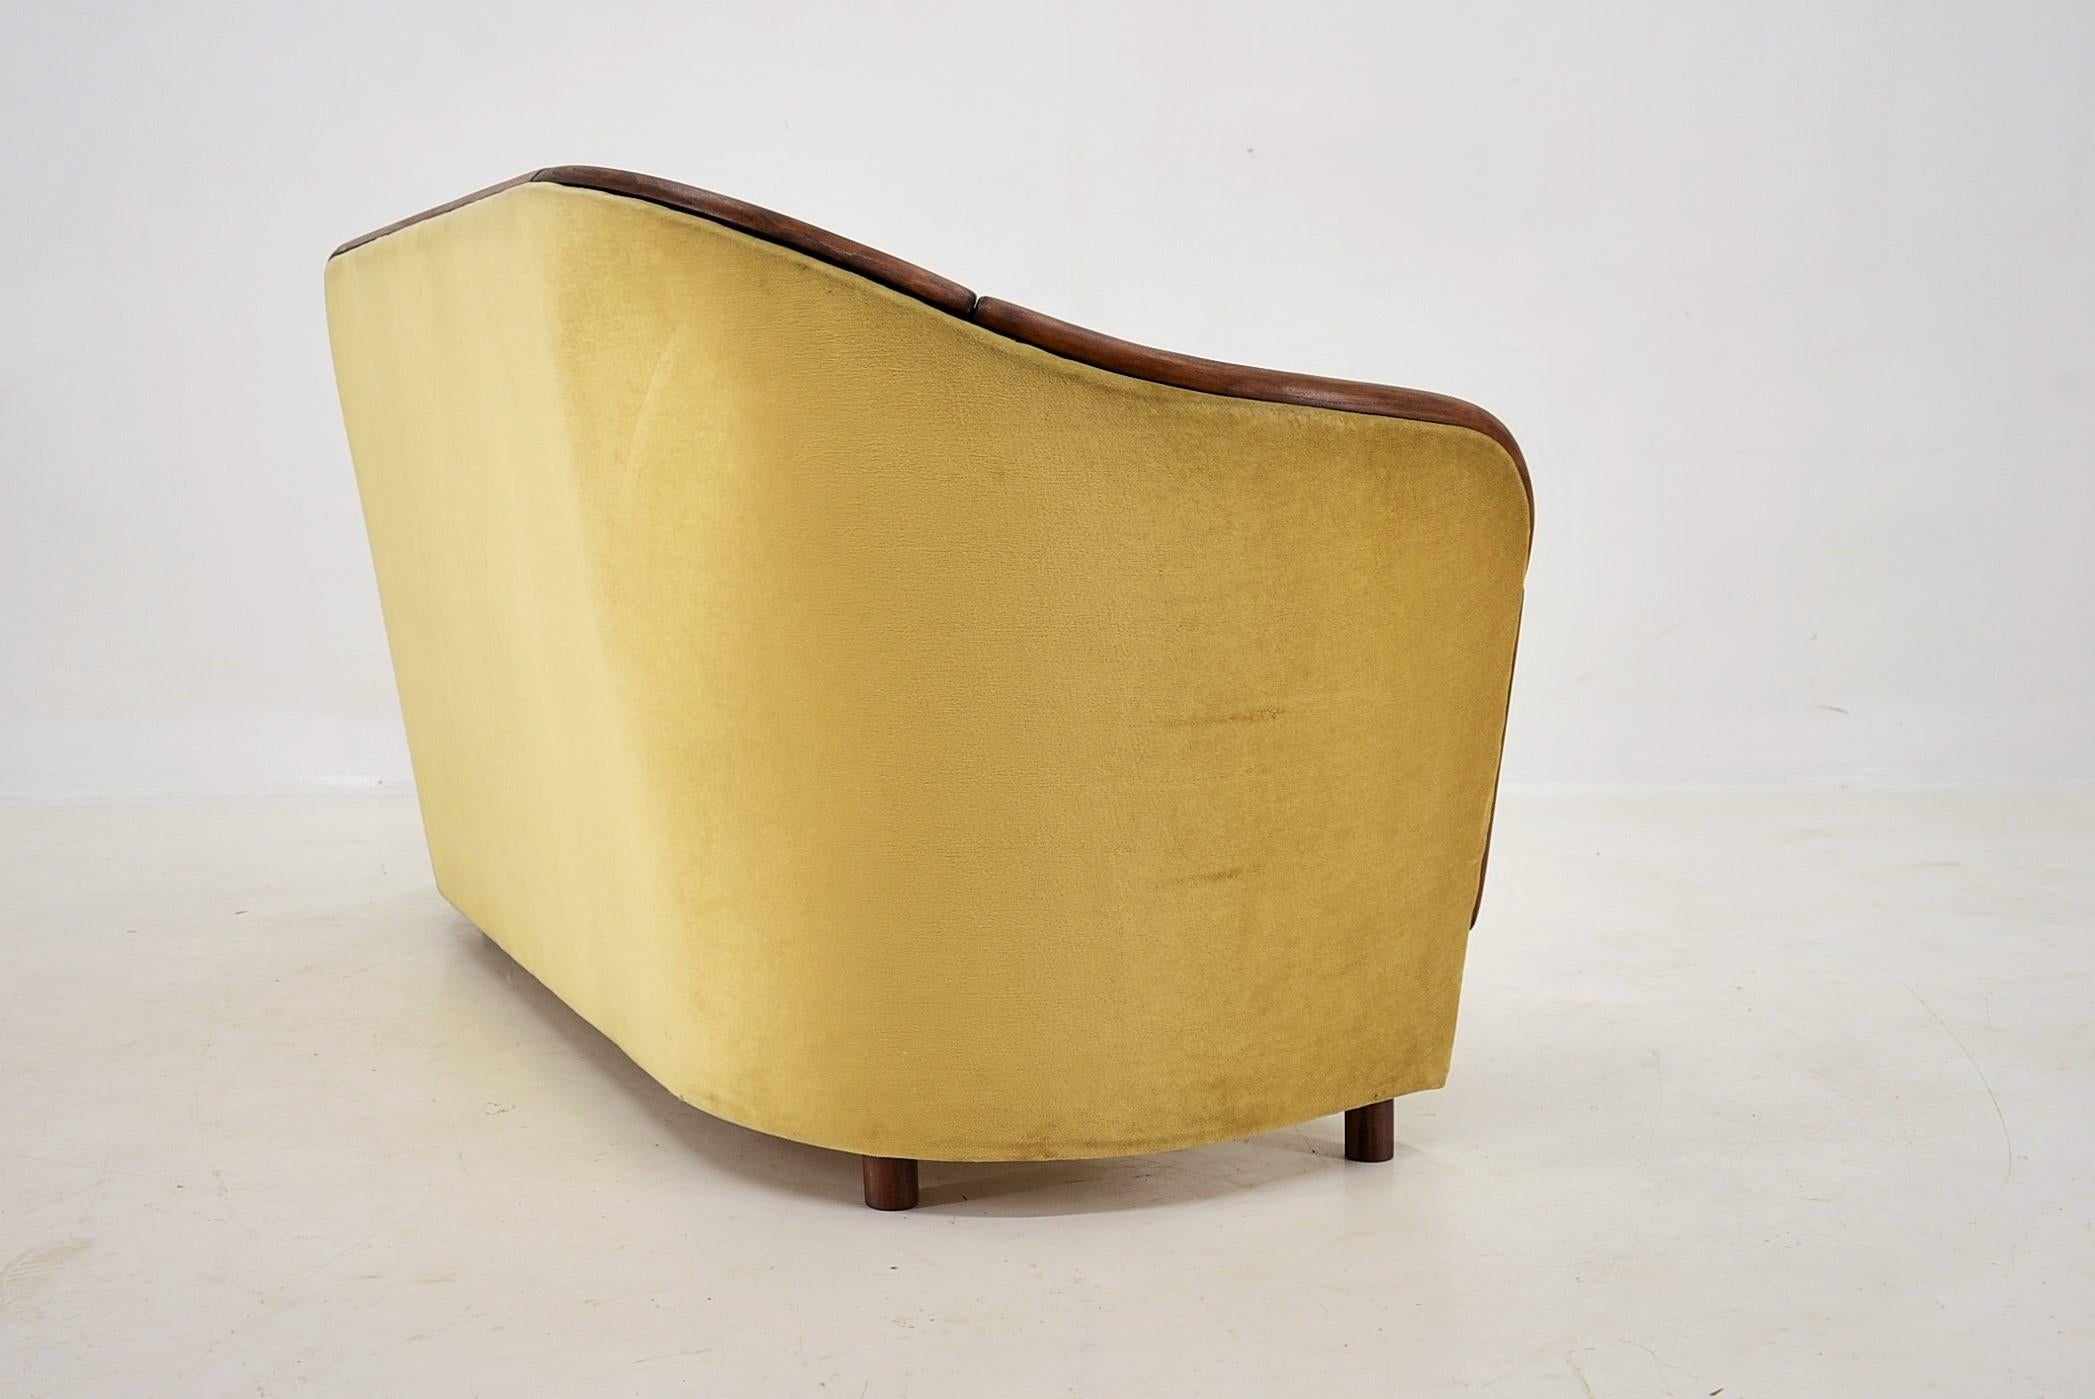 Italian 2-Seat Sofa in the Style of Gio Ponti, 1950s For Sale 9